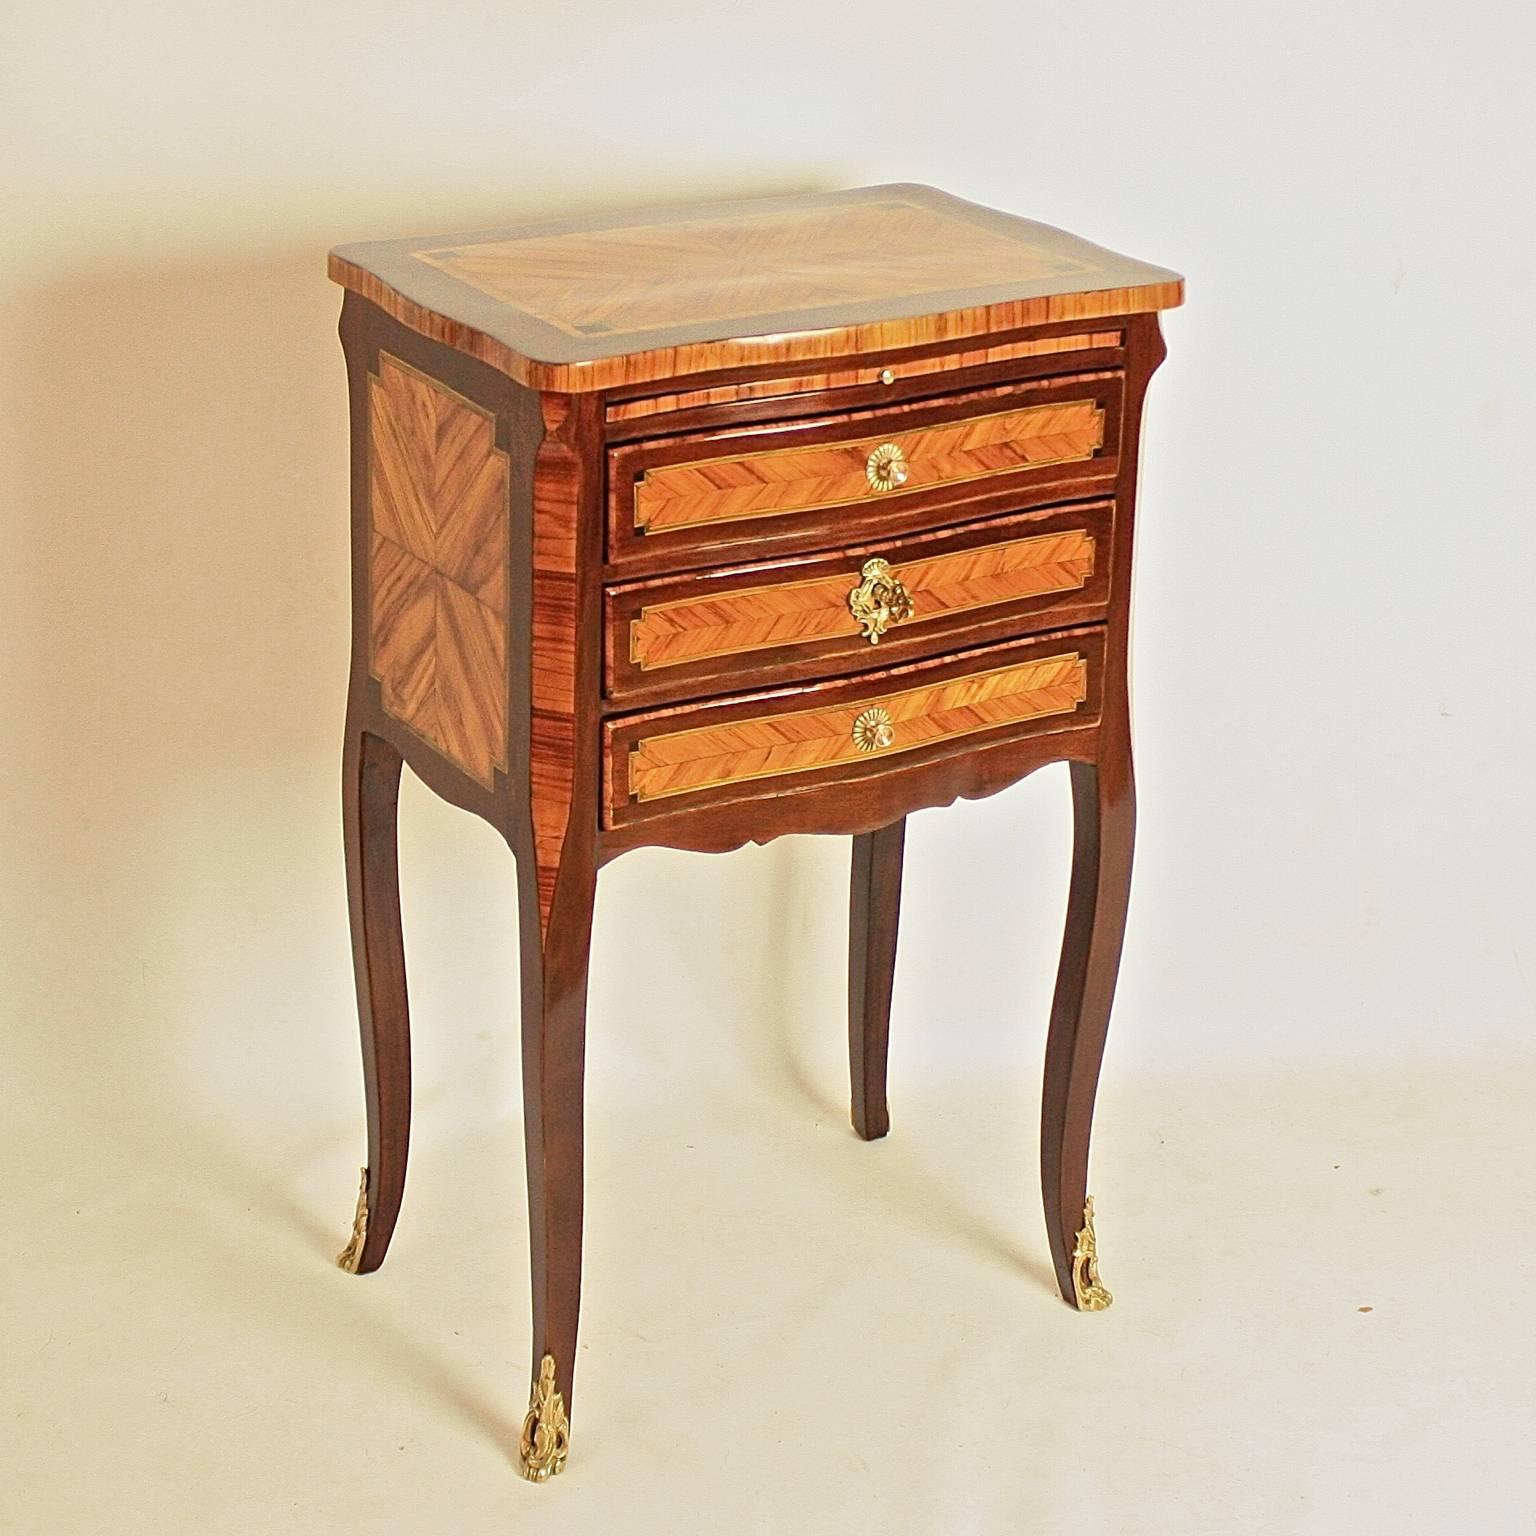 A Louis XV gilt bronze mounted kingwood and amaranth marquetry center table, a so called 'table chiffonière', with a marquetry shaped top above three serpentine drawers, with a shaped apron and canted corners, on slender cabriole legs with gilt